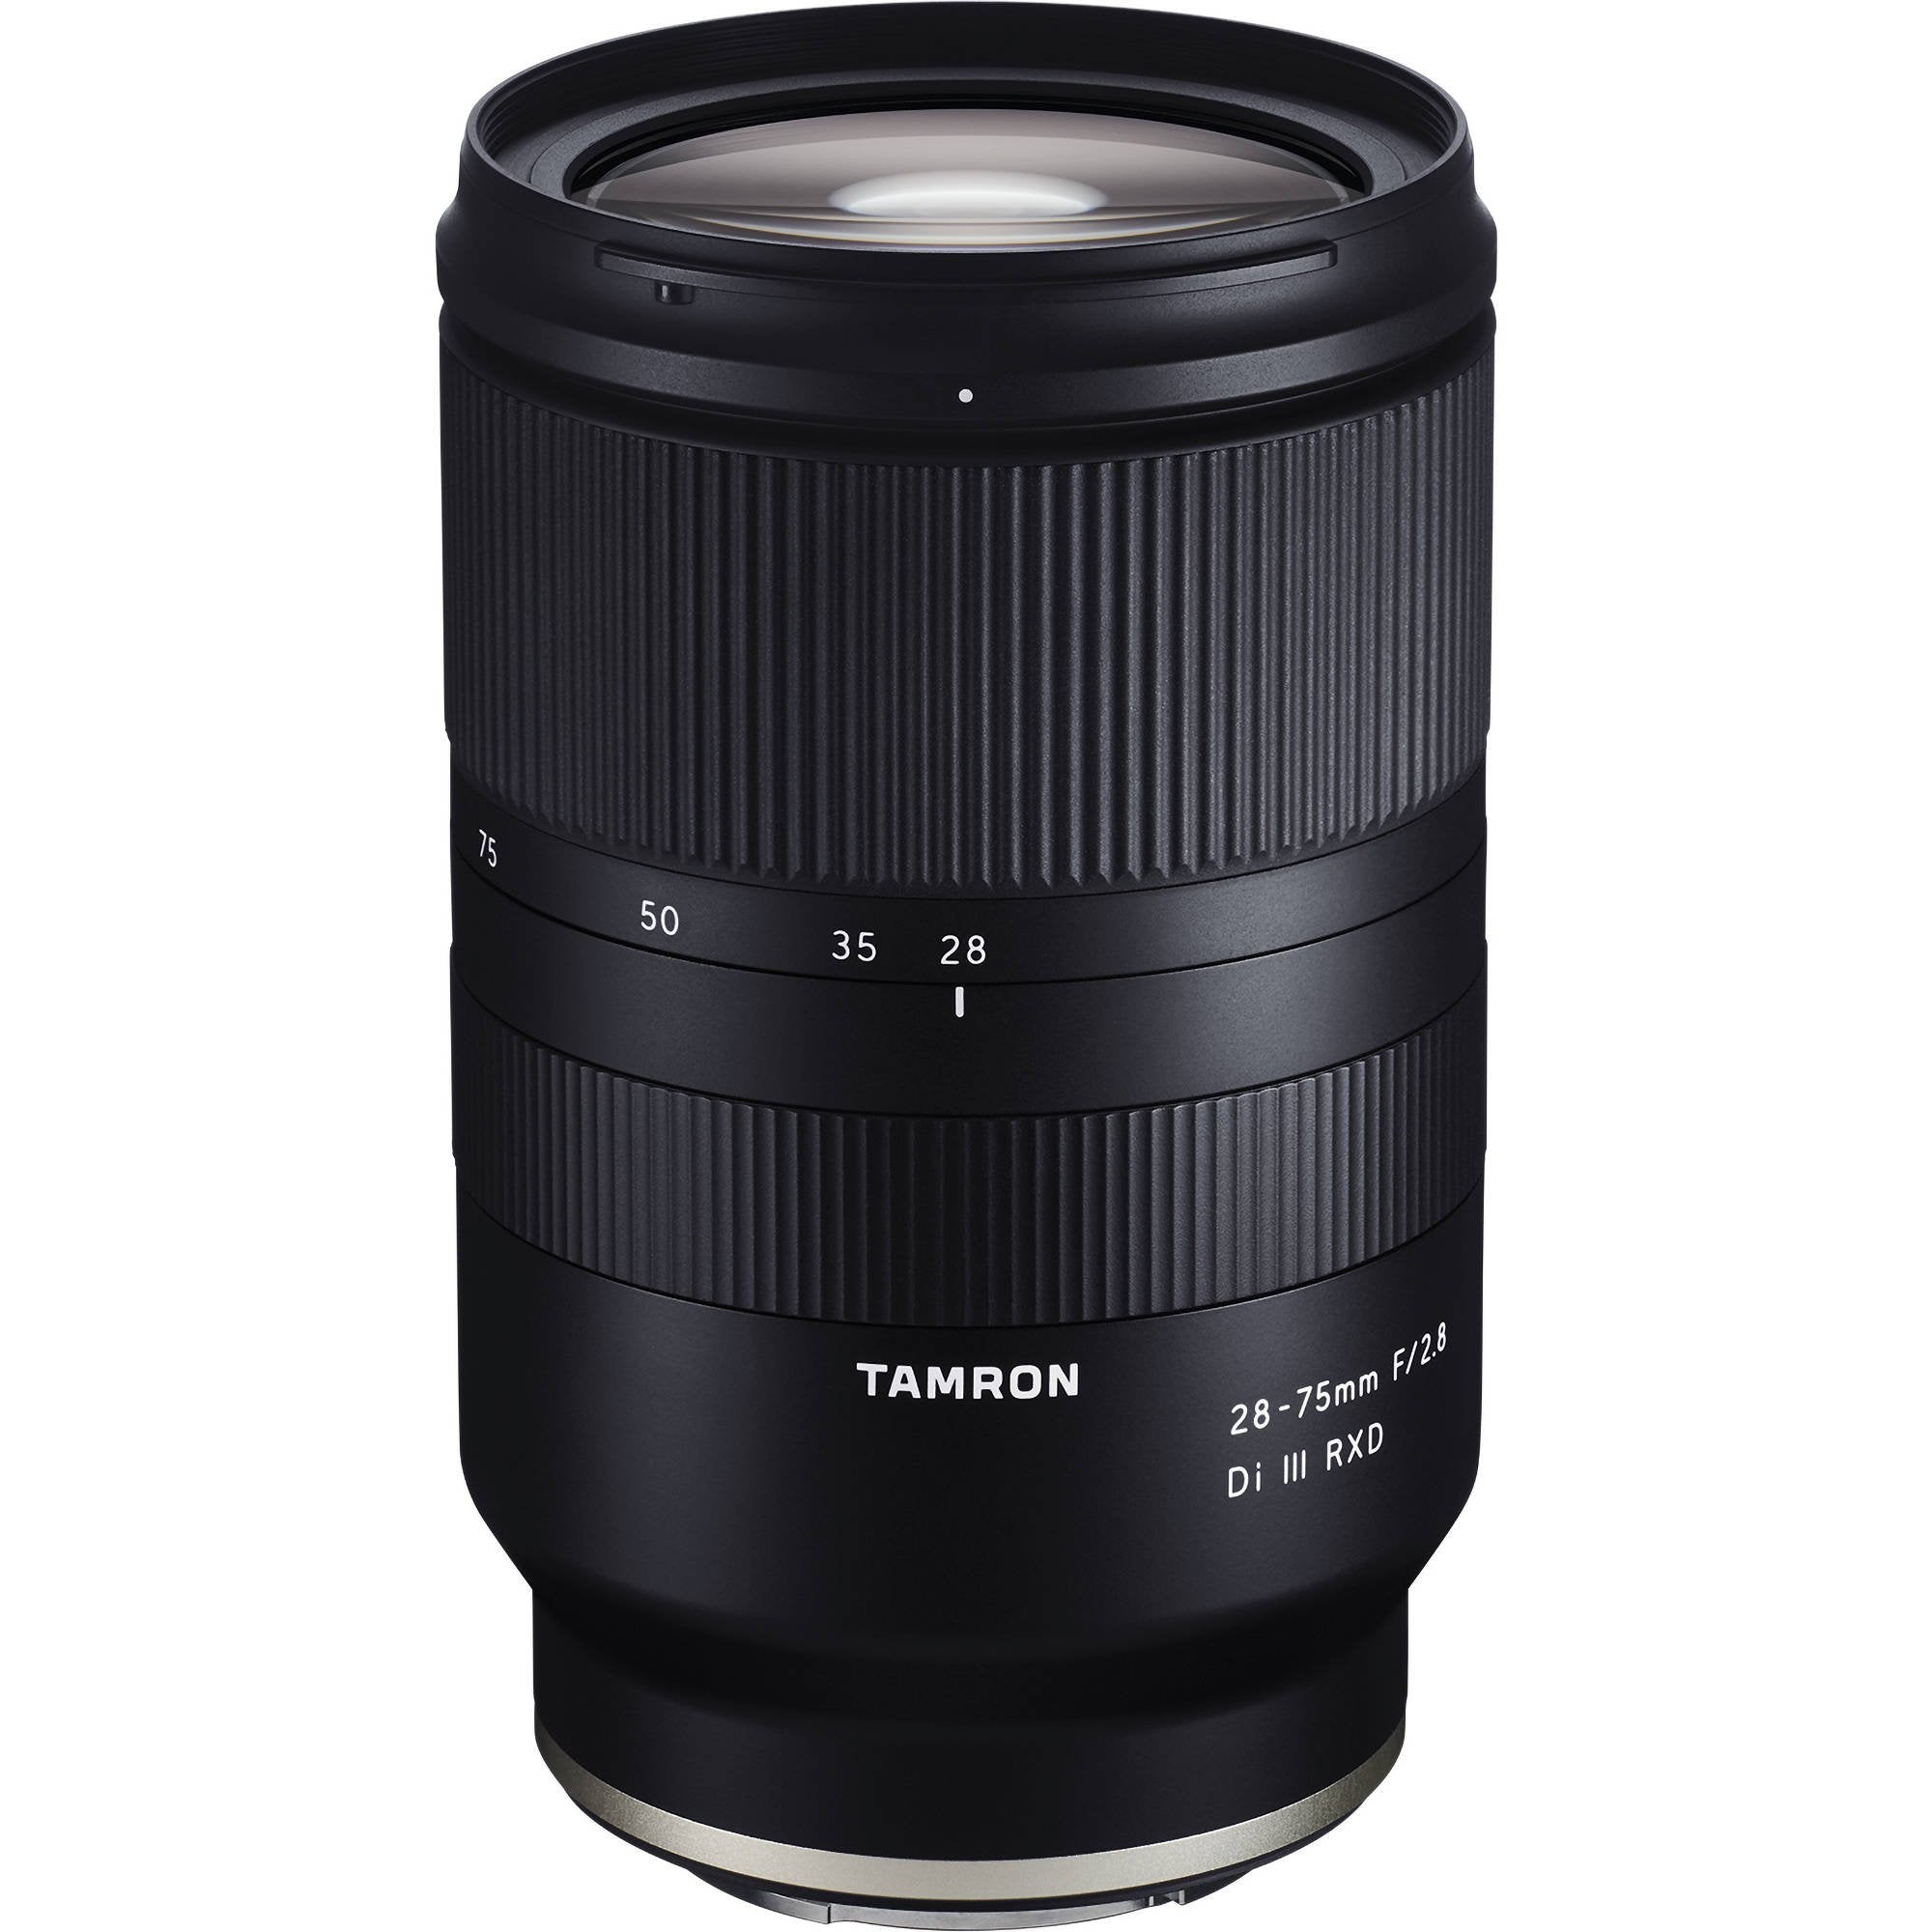 Tamron 28-75mm F/2.8 for Sony Mirrorless camera